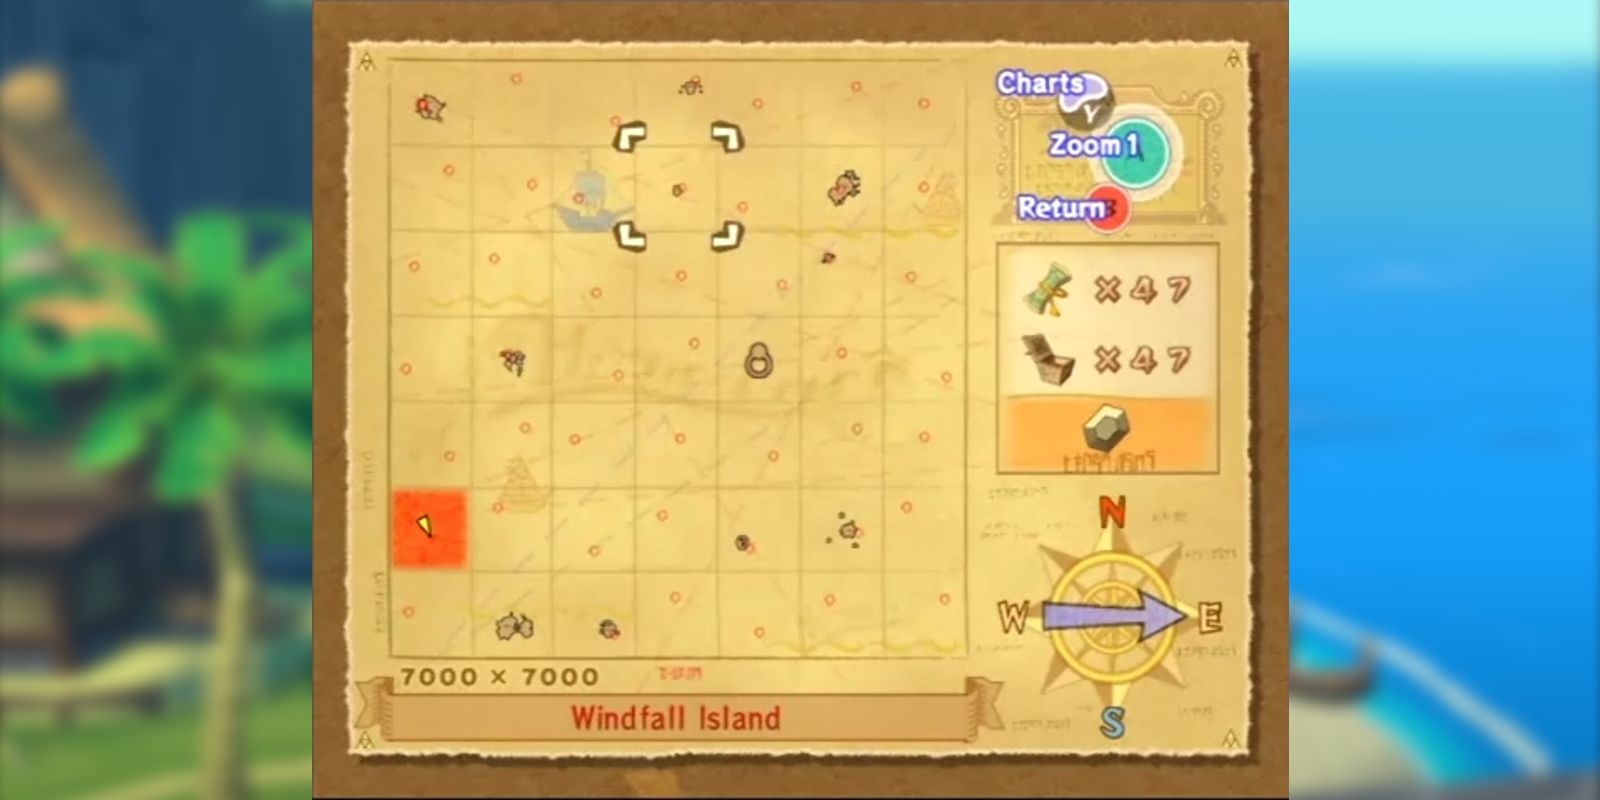 The Sea Chart map from The Legend of Zelda: The Wind Waker.